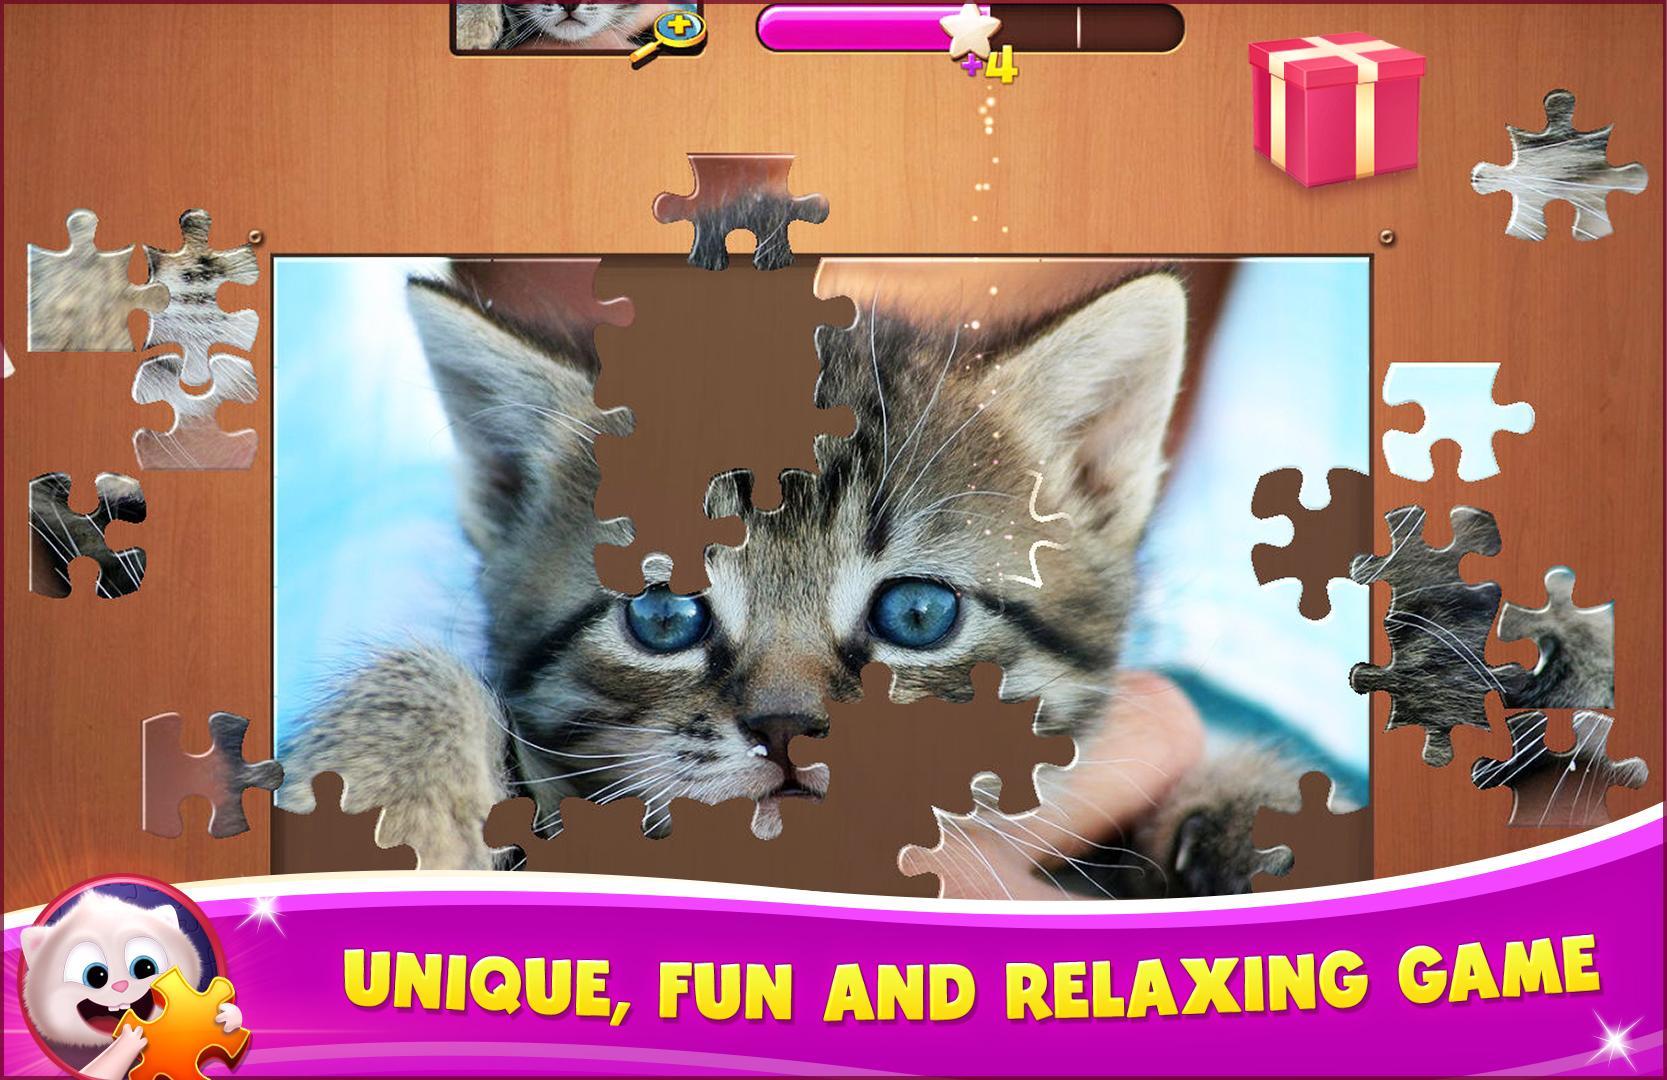 Screenshot 1 of Jigsaw Picture Puzzle-Spiele 1.0.8